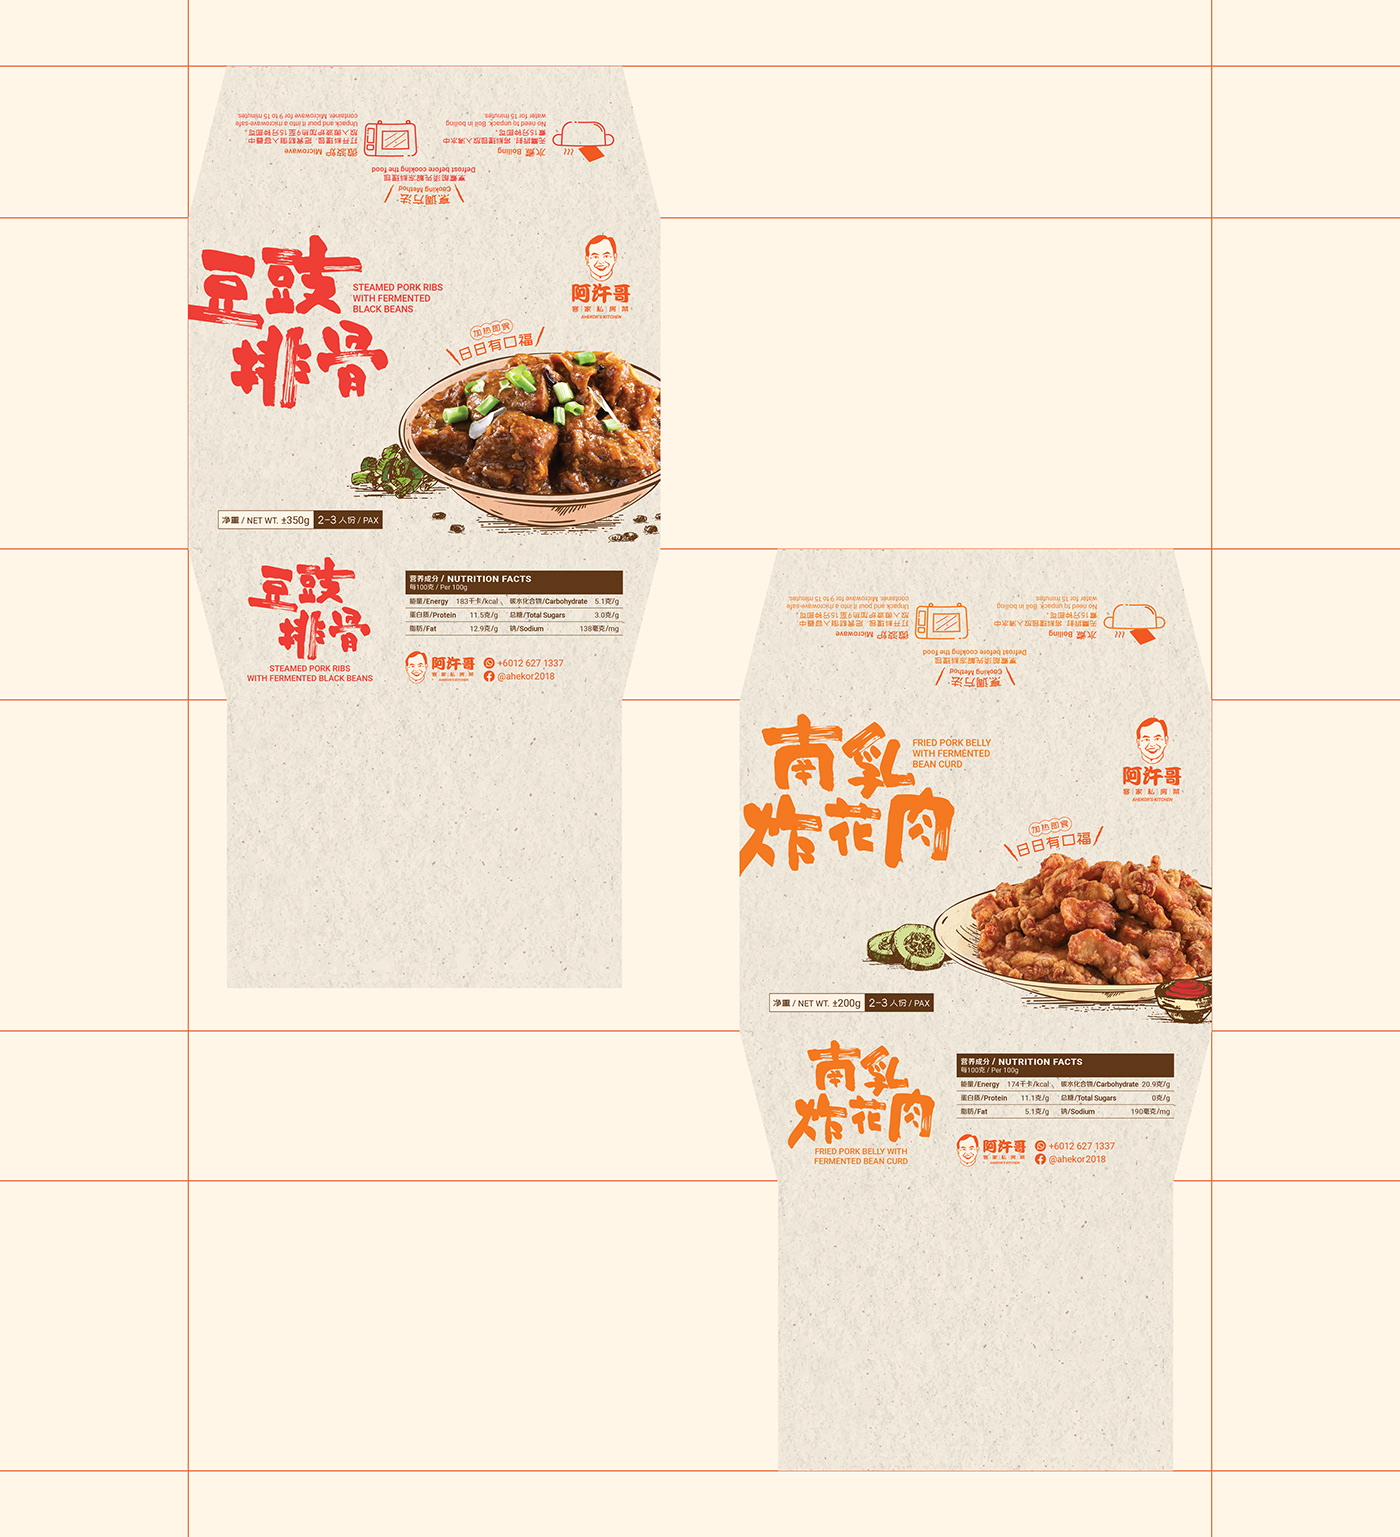 Food Packaging Design Meal box ready to eat frozen food nutrition facts Chinese Food food box design food packaging boxes instant food ready to cook